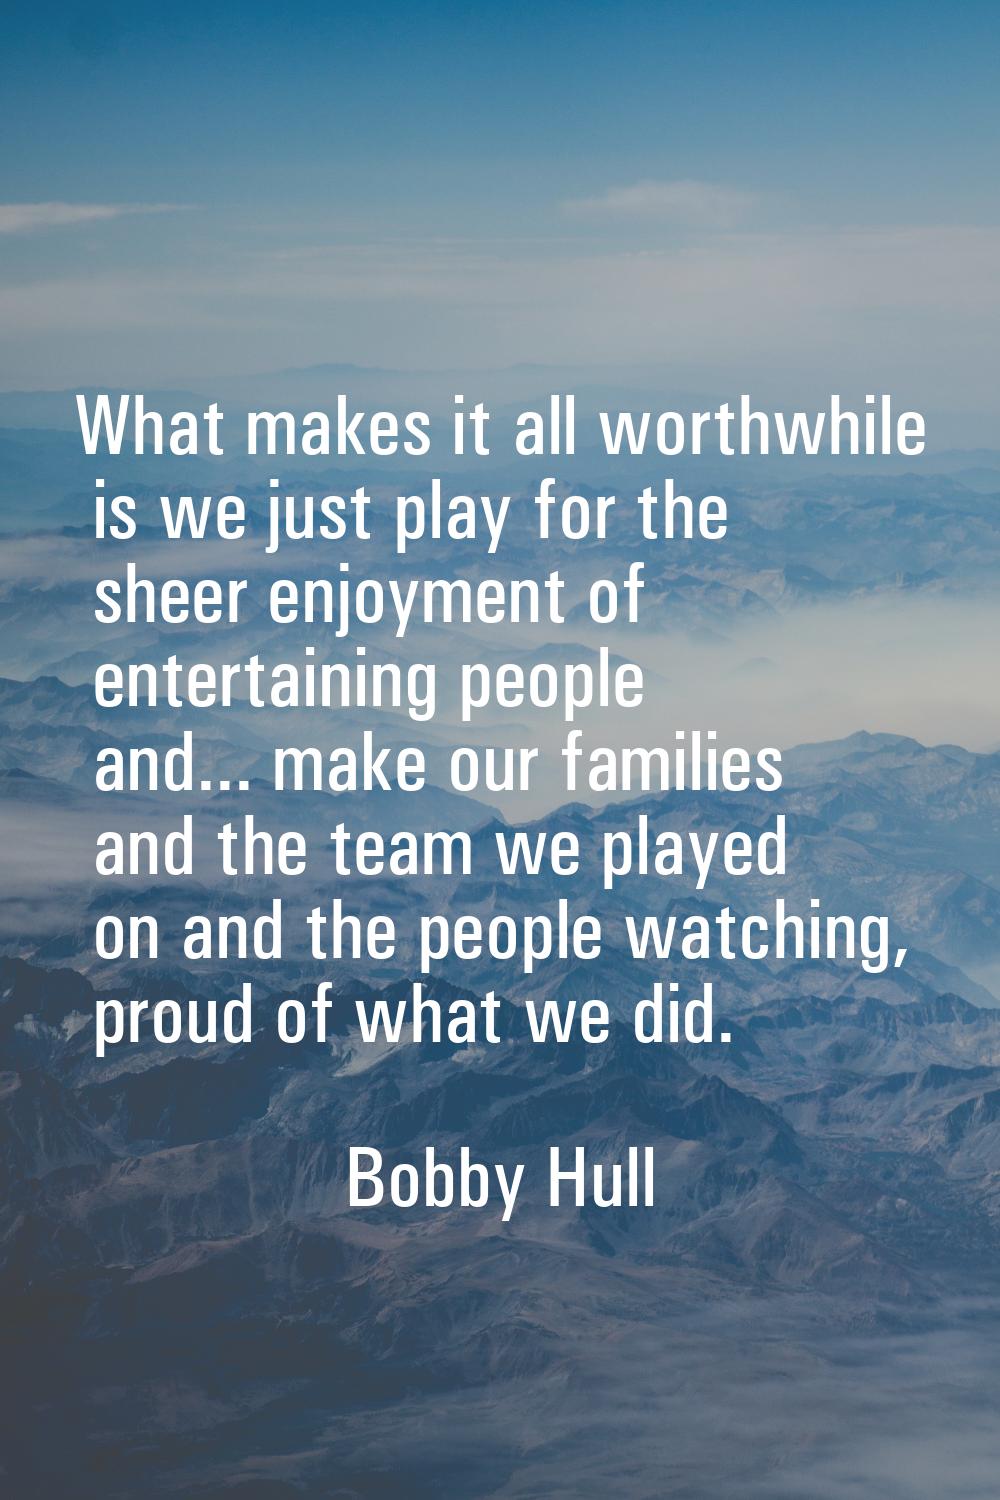 What makes it all worthwhile is we just play for the sheer enjoyment of entertaining people and... 